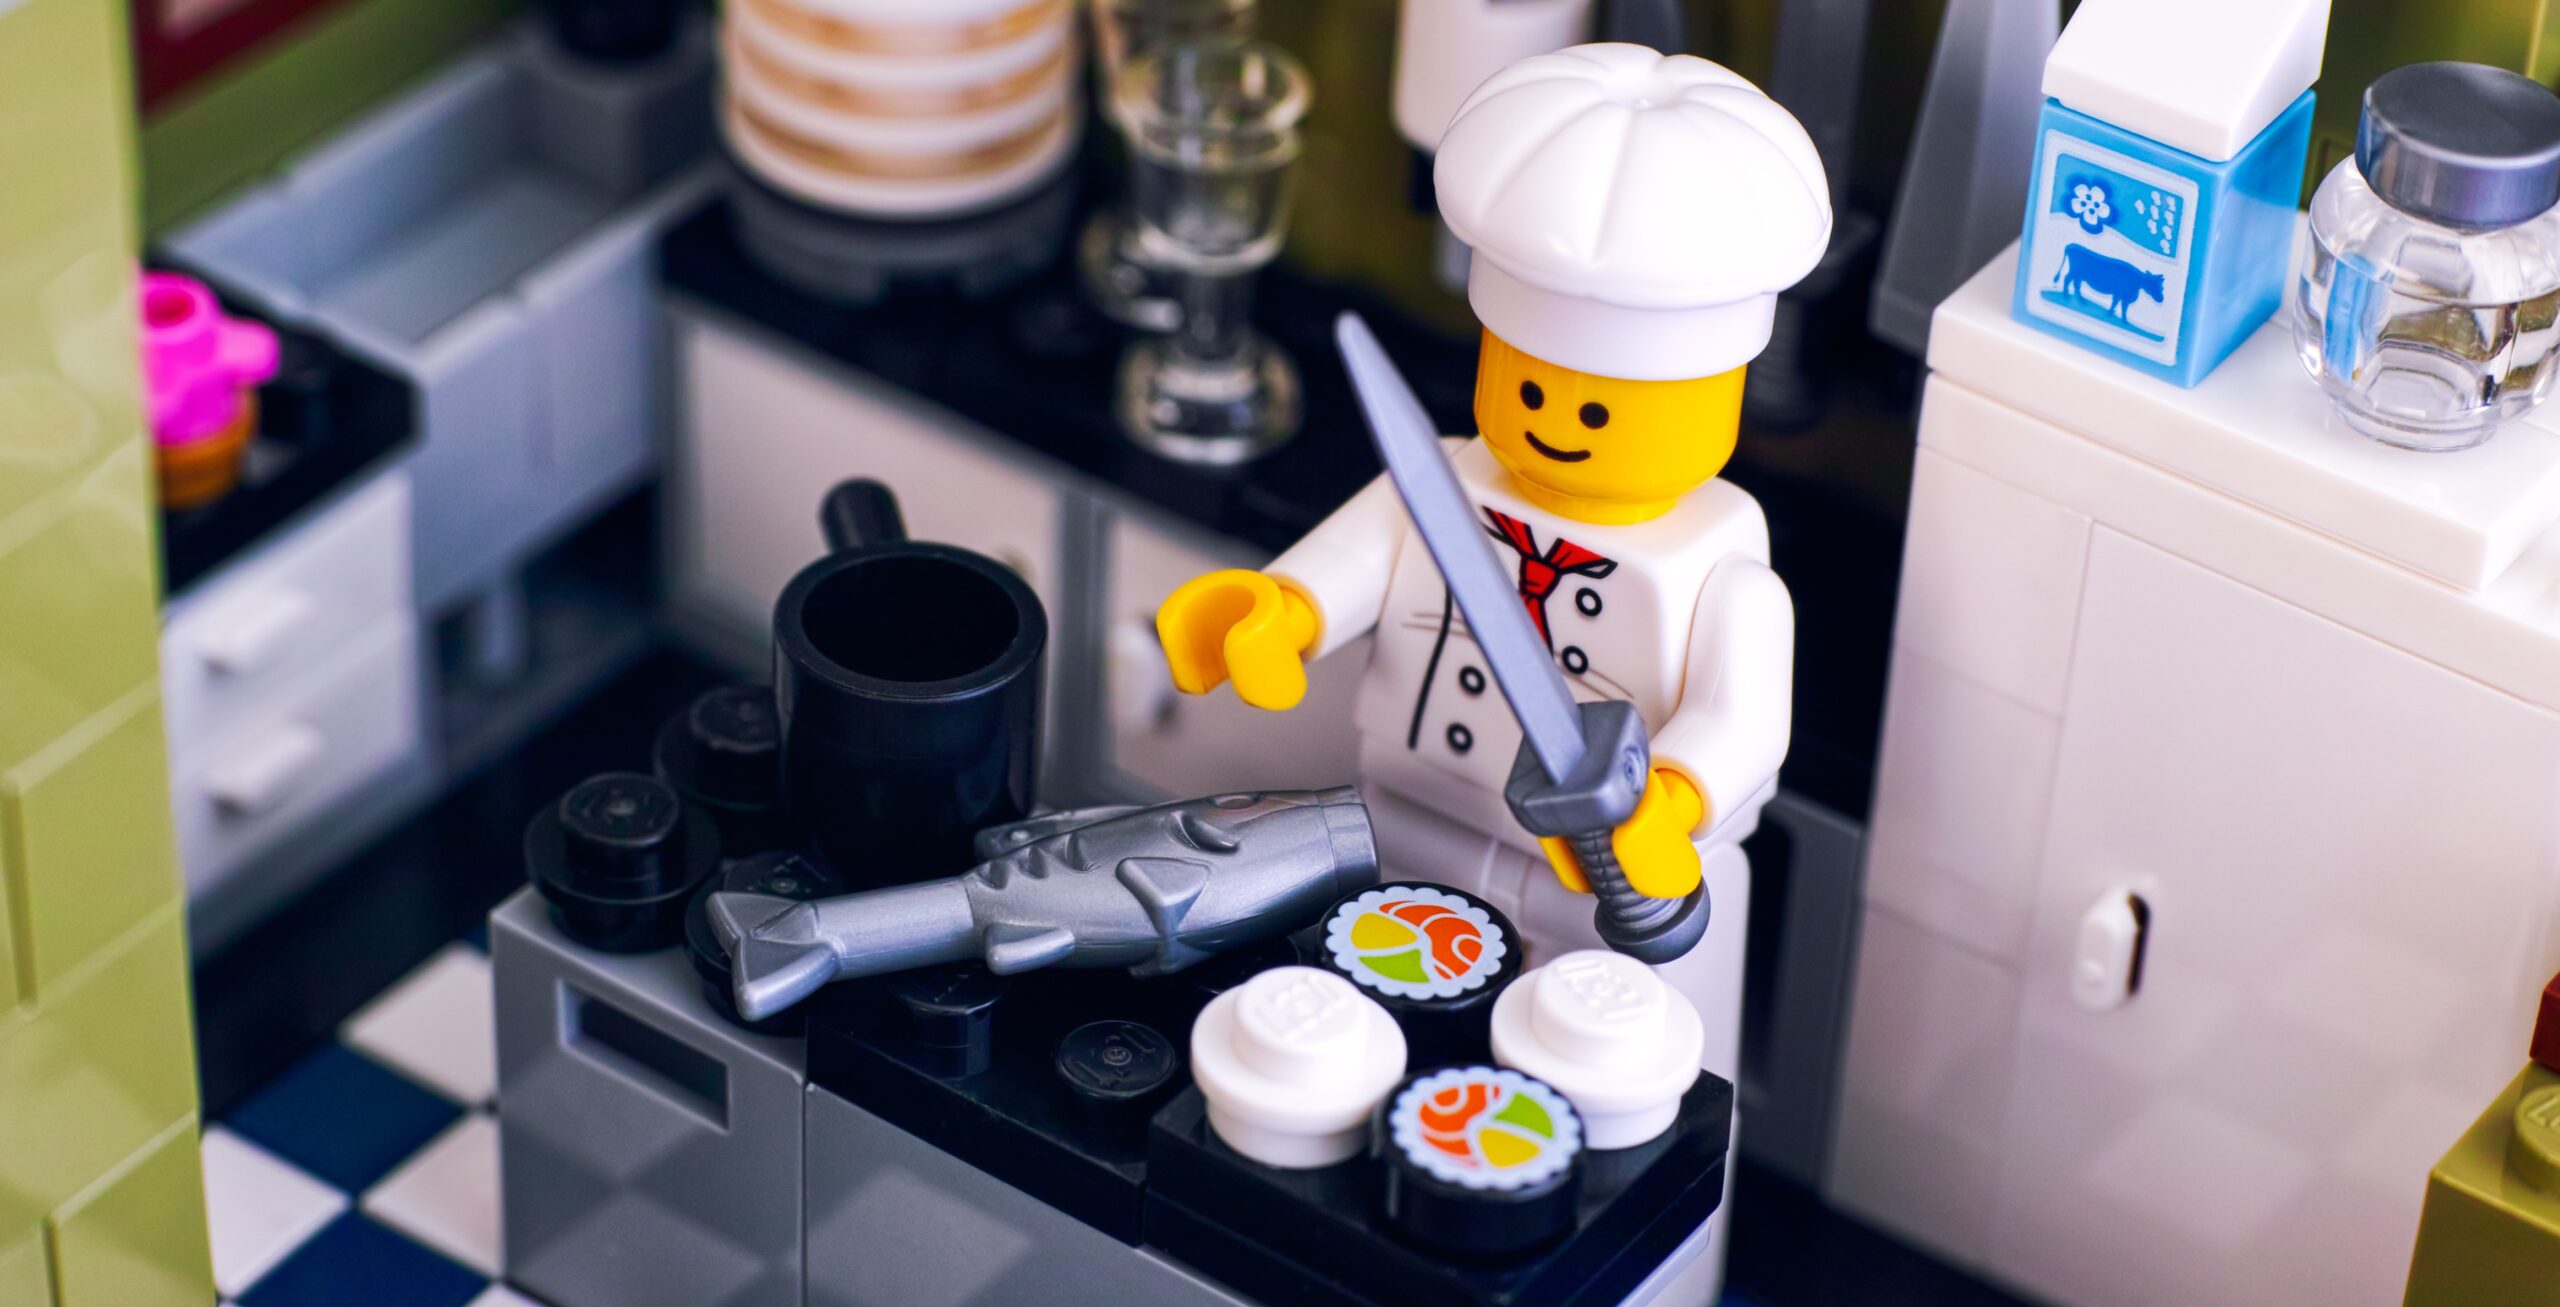 Lego chef cooking sushi and fish in the kitchen.